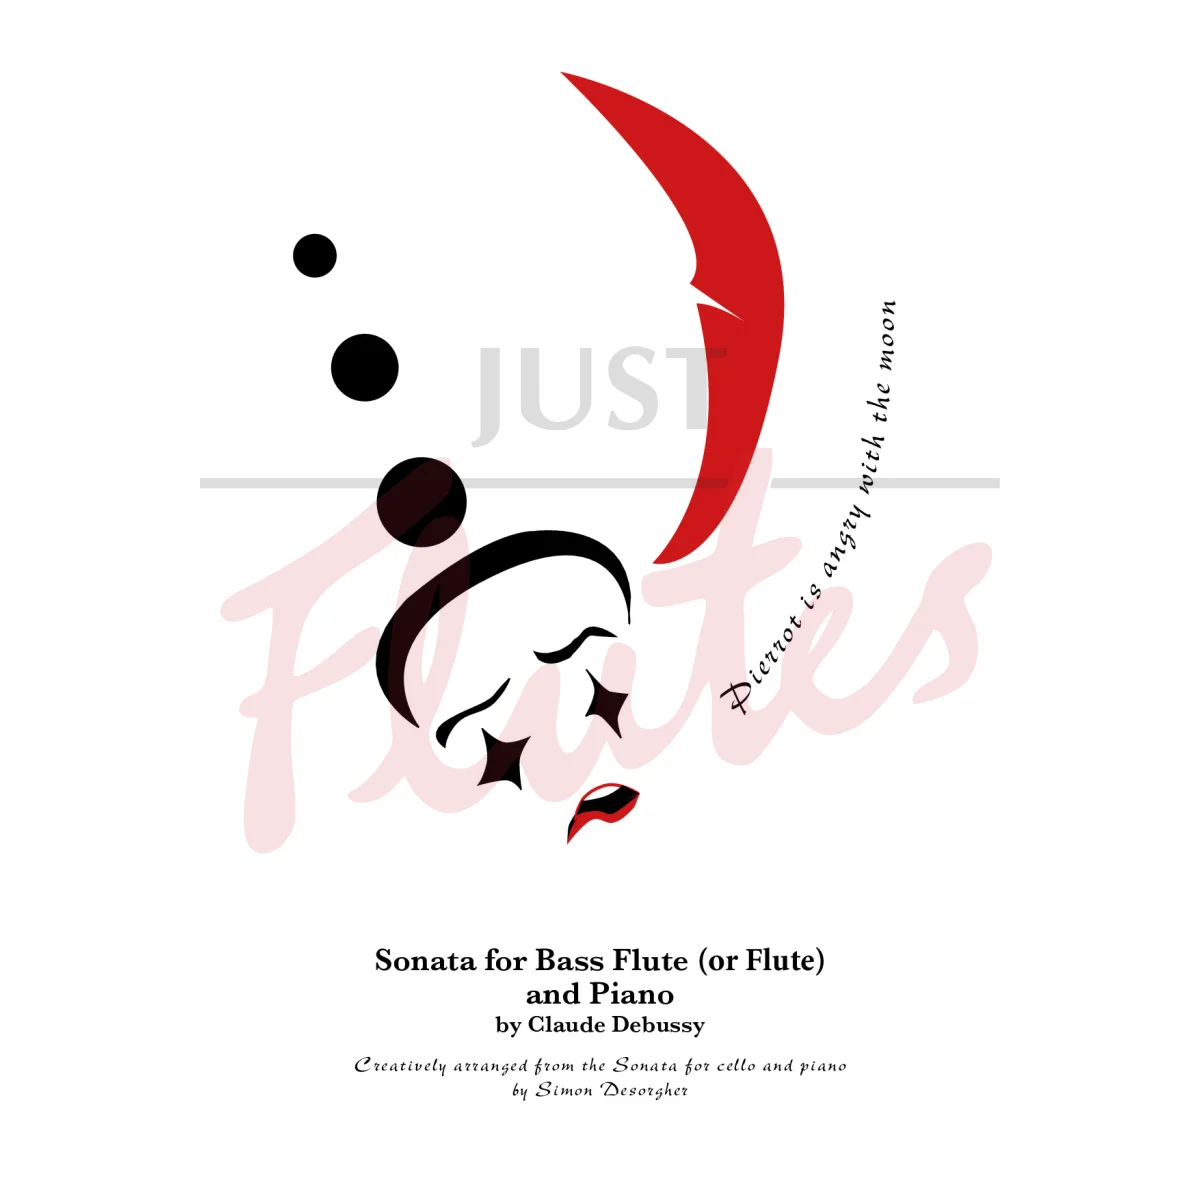 Sonata for Bass Flute (or Flute) and Piano